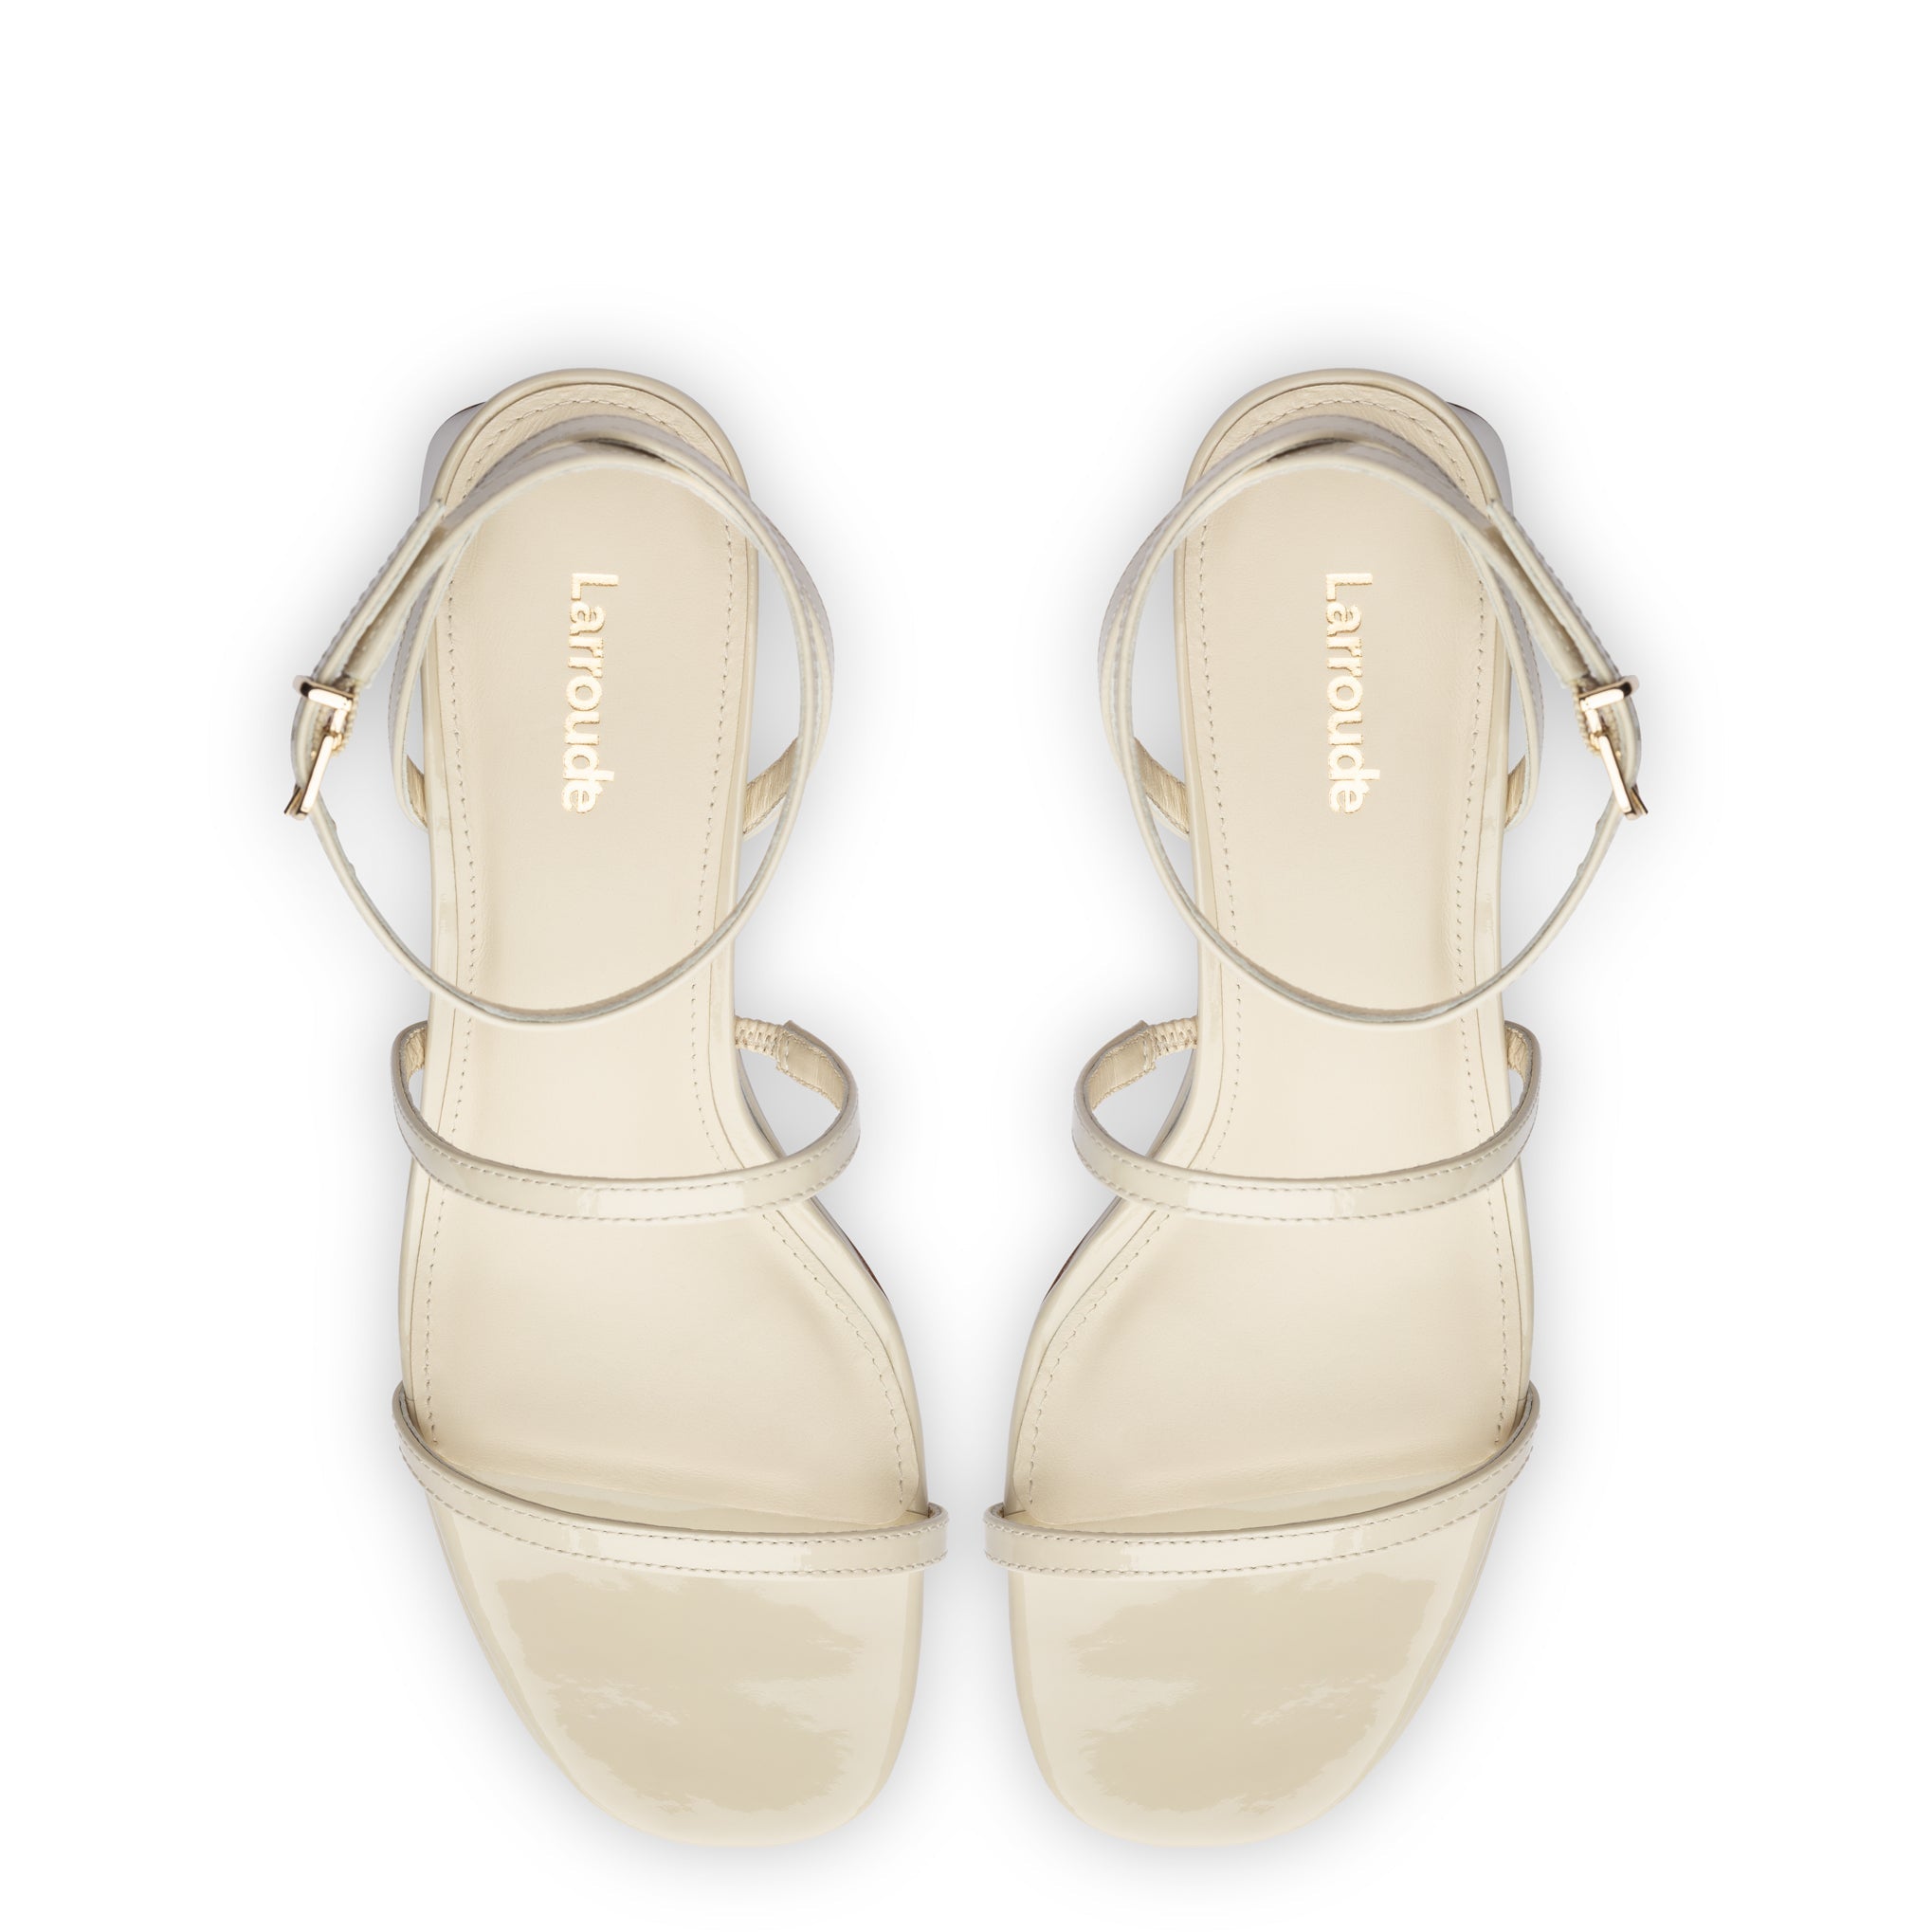 Gio Sandal In Ivory Patent Leather